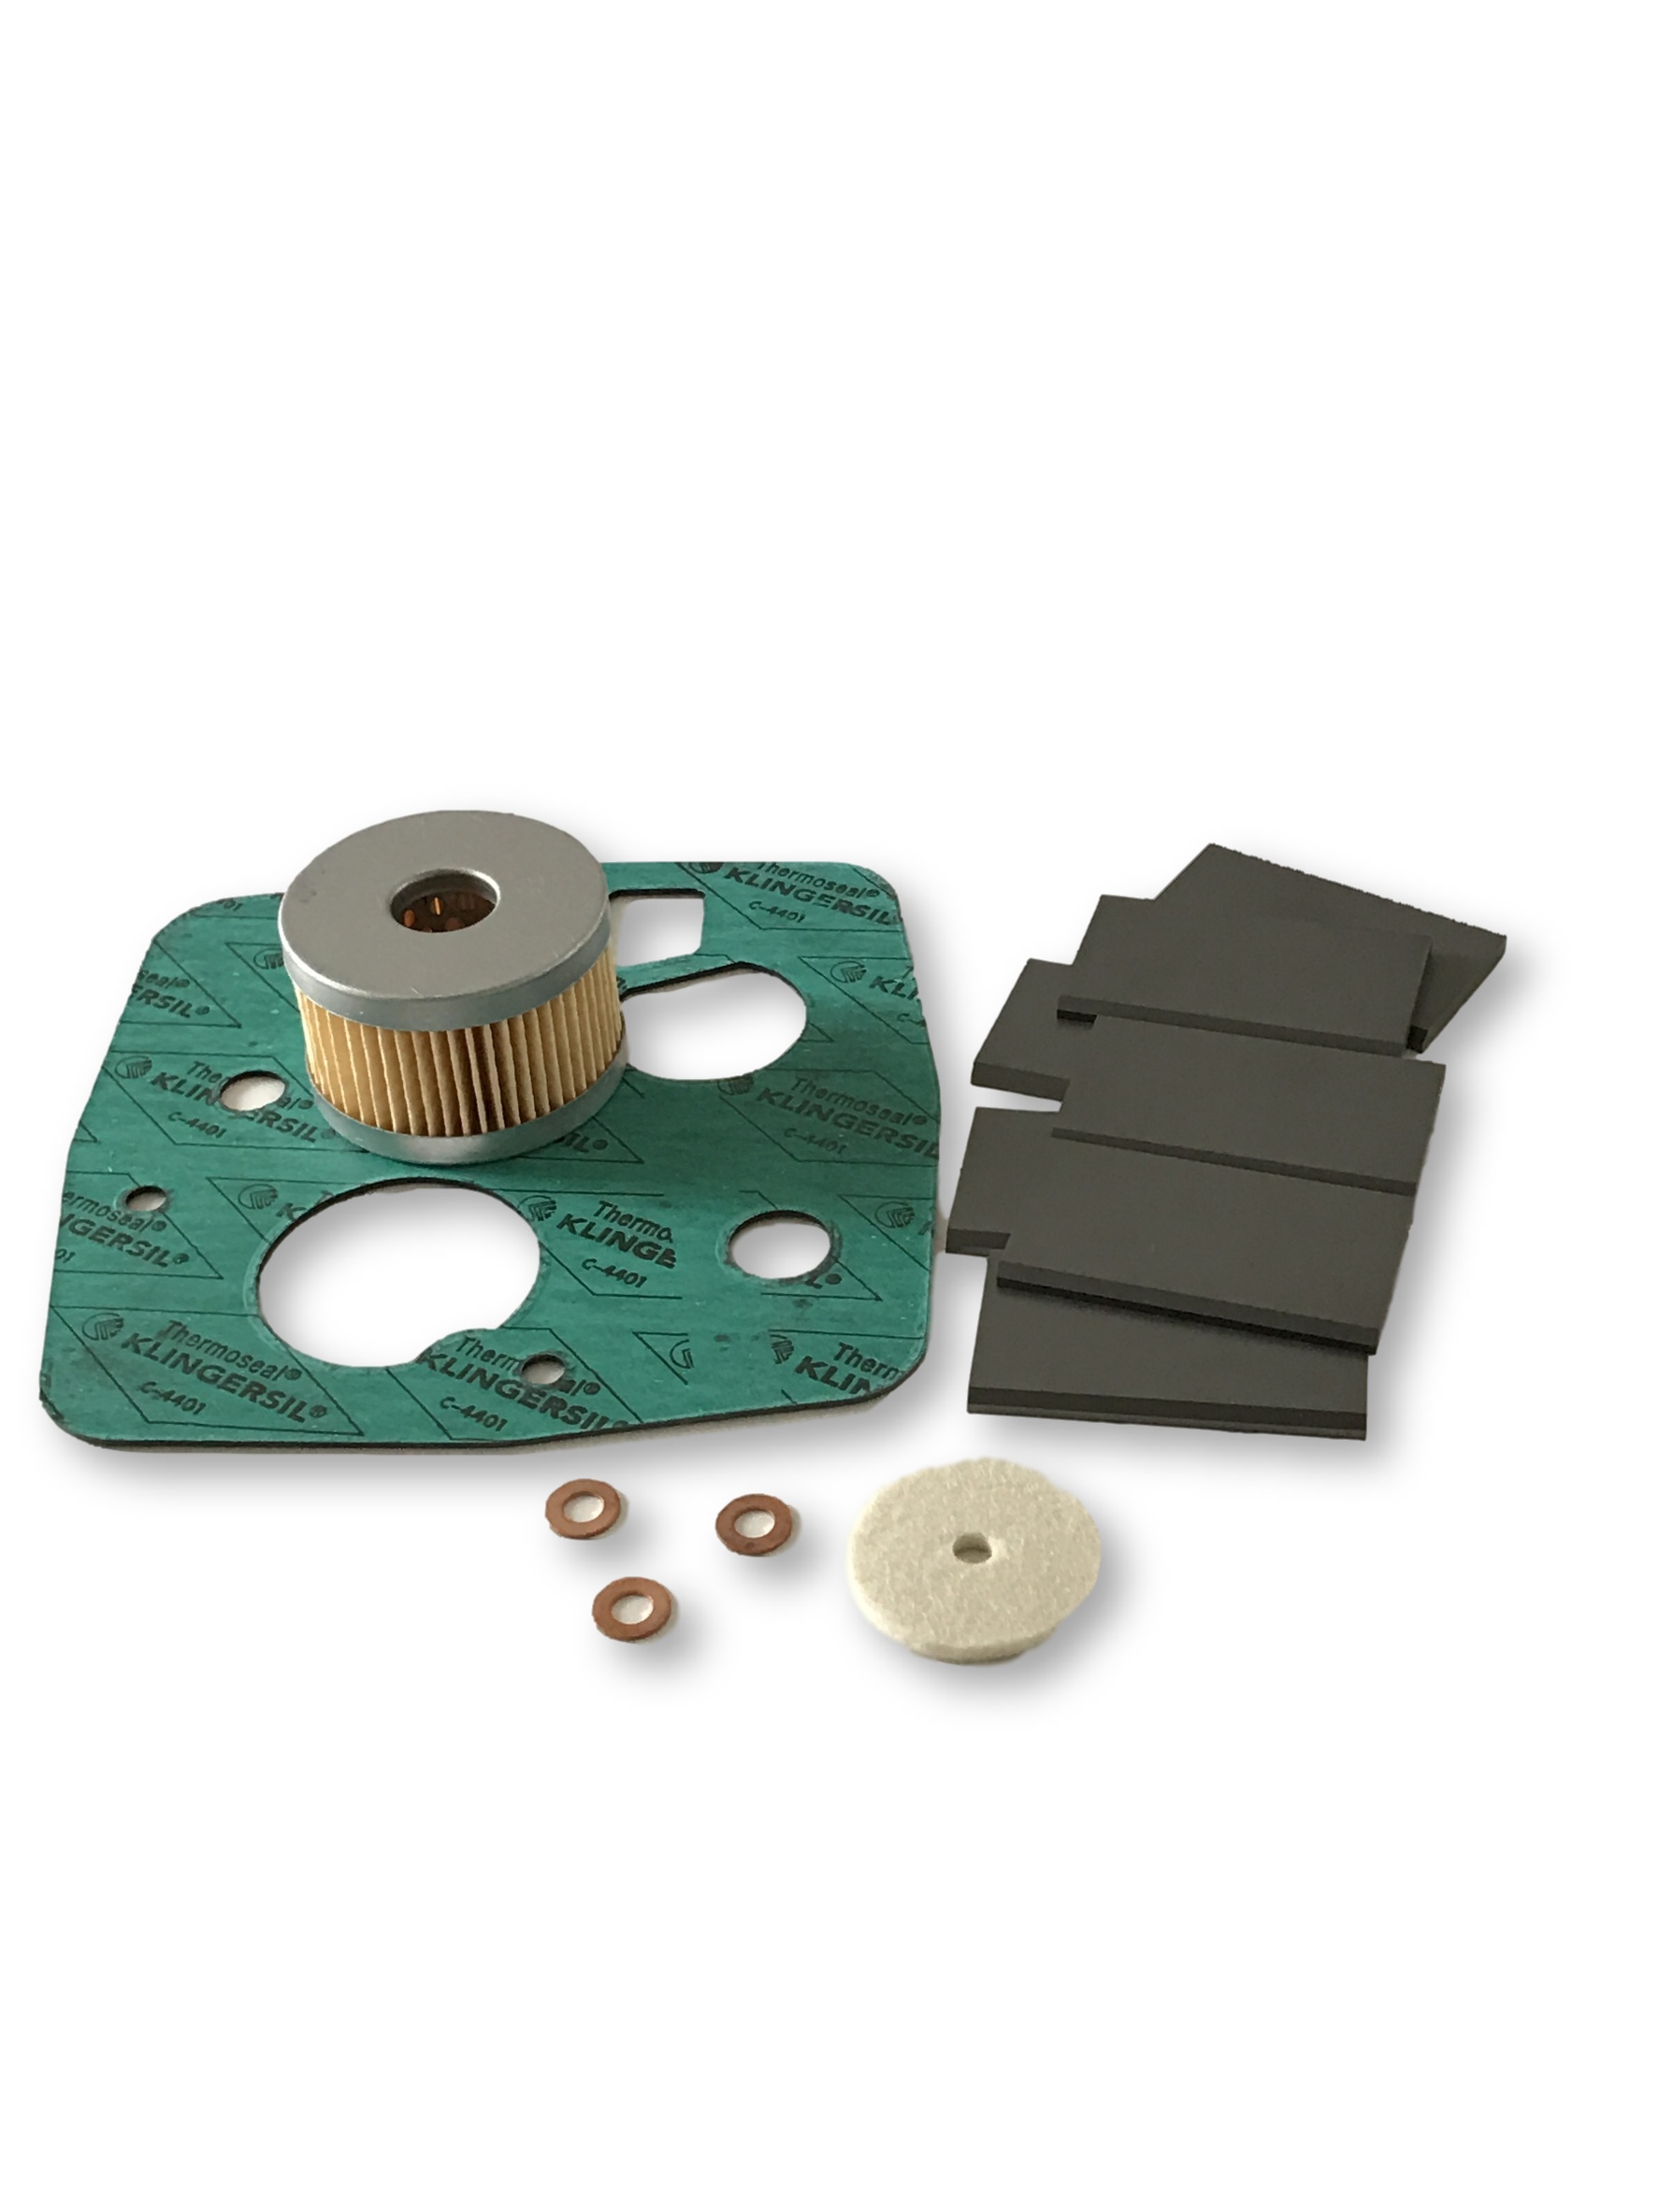 Overhaul repair kit SV/SD 1016C - PN : PPB994528977 for Busch Vacuum vacuum pump SECO SD SV. Your spare parts up to 50% cheaper !